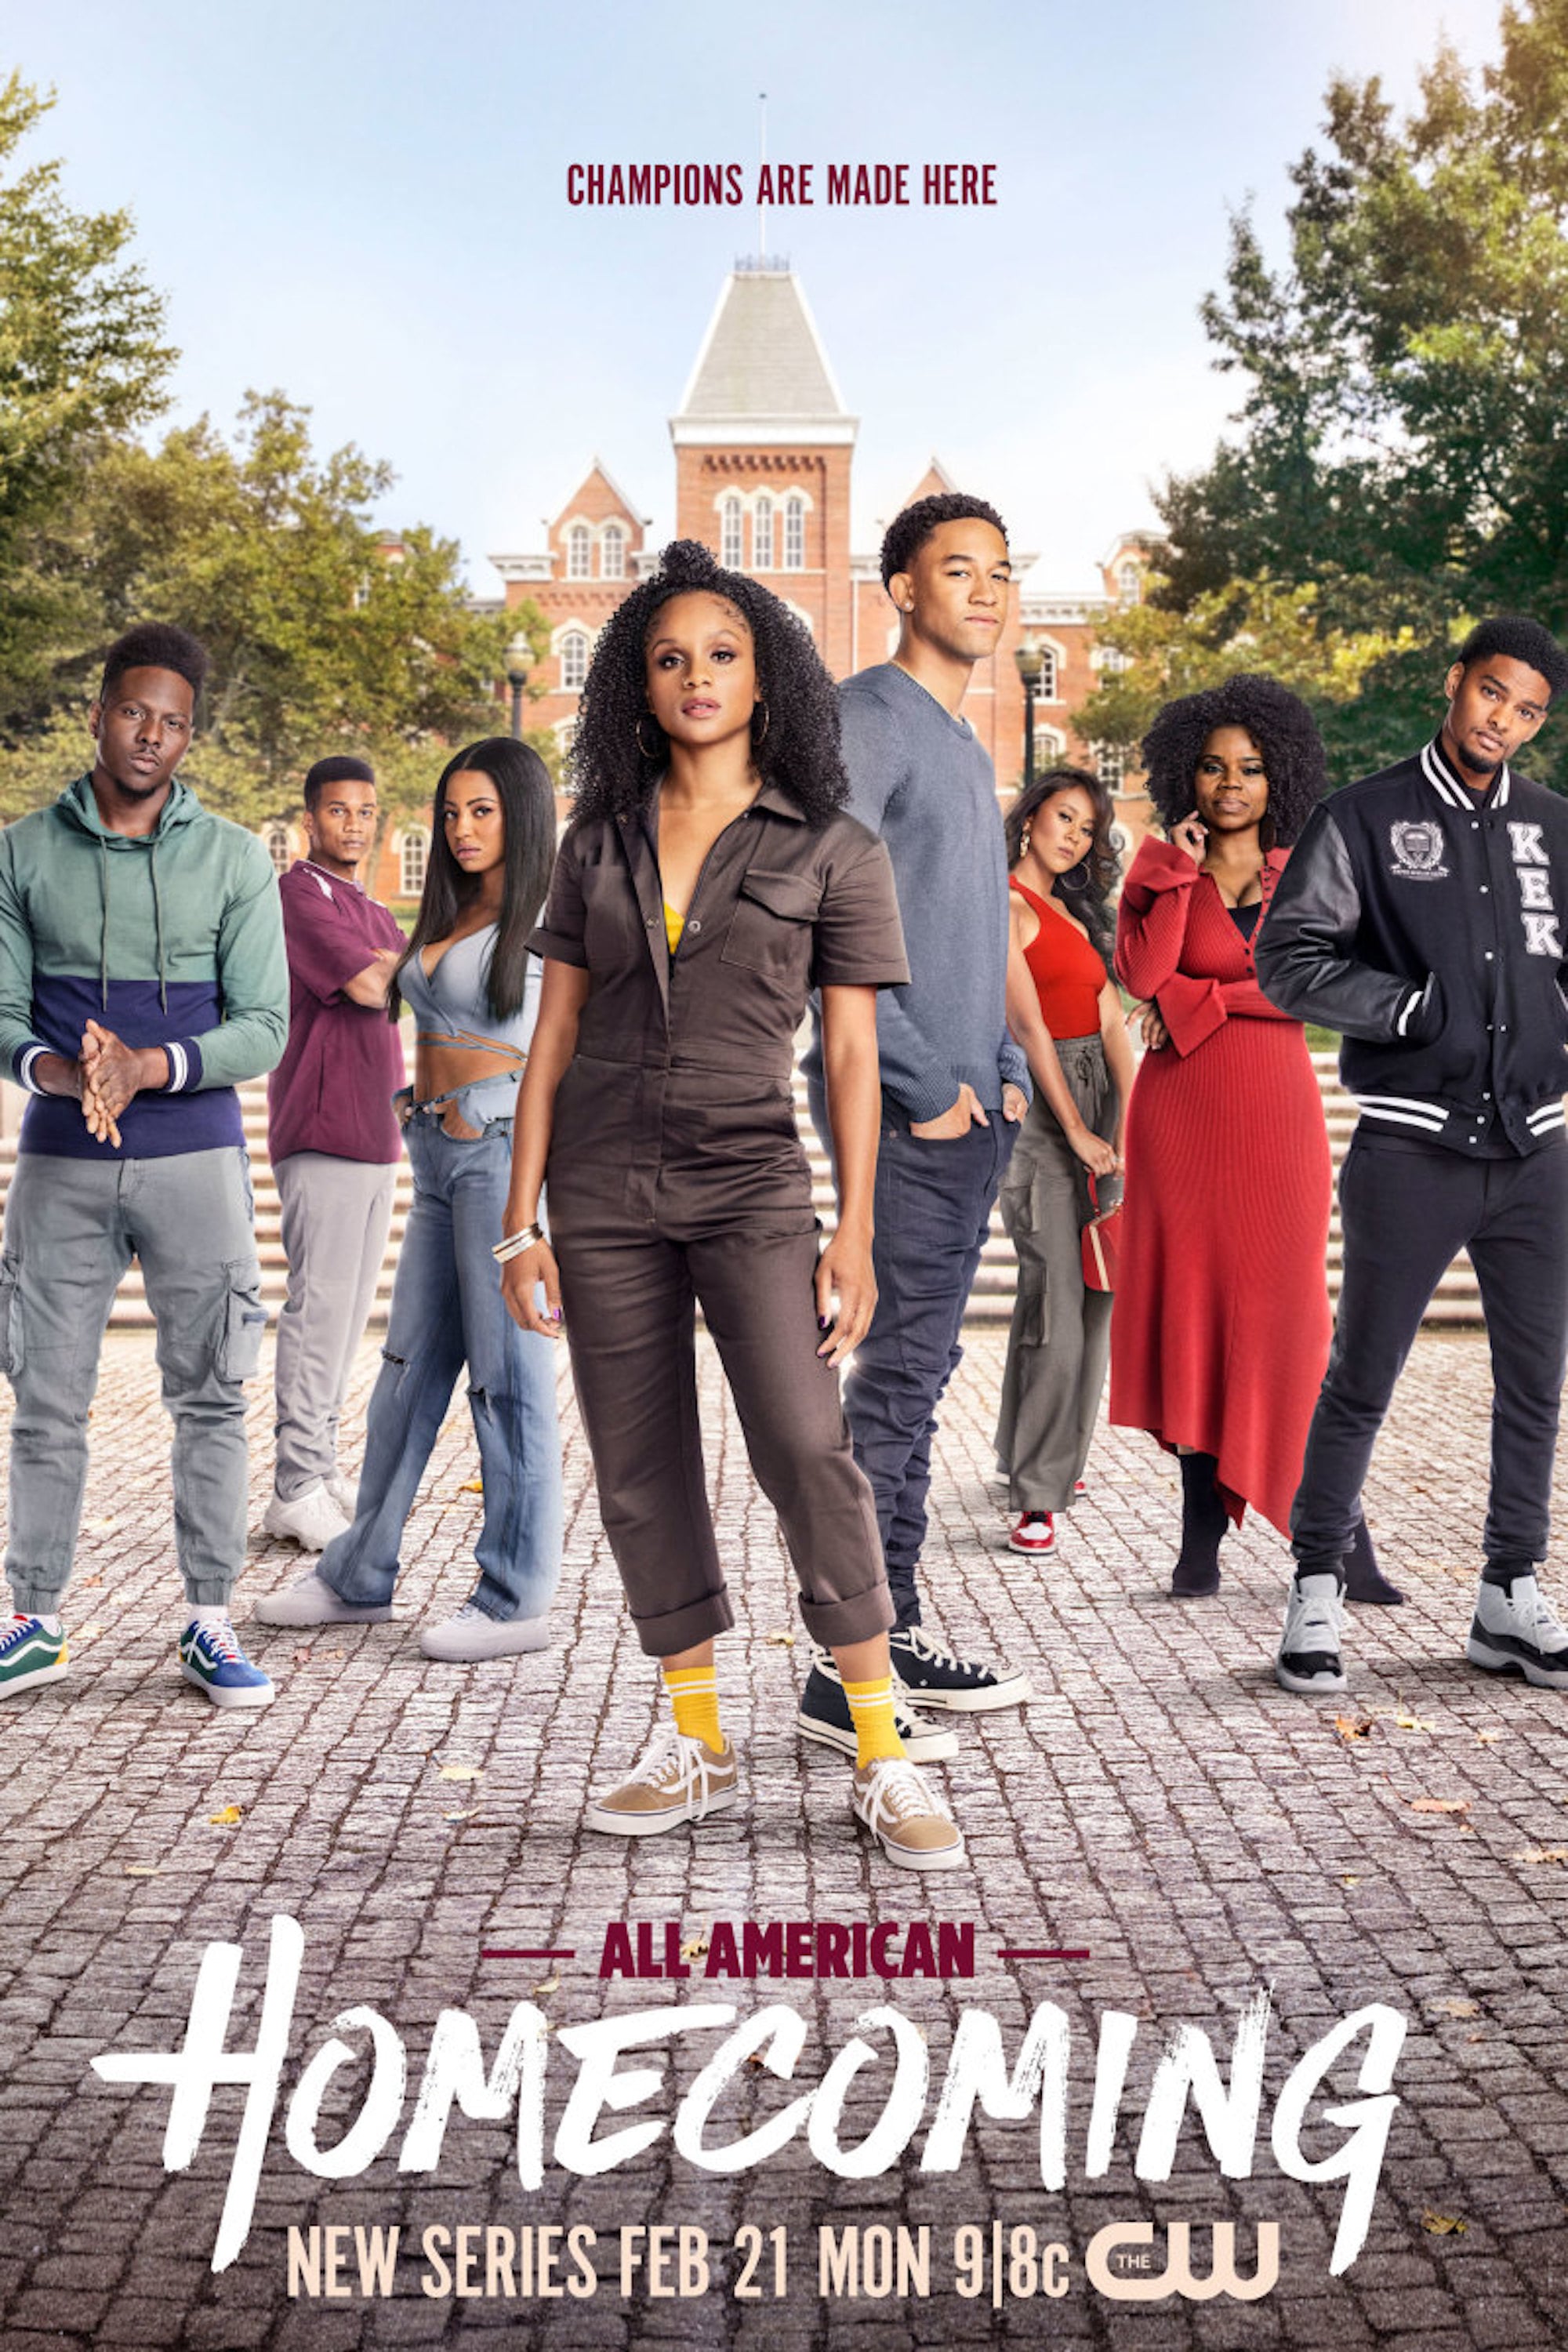 All American: Homecoming -- Image Number: AHC_S1_8x12_300dpi.jpg -- Pictured (L-R): Mitchell Edwards as Cam Watkins, Cory Hardrict as Coach Marcus Turner, Camille Hyde as Thea Mays, Geffri Maya as Simone Hicks, Peyton Alex Smith as Damon Sims, Netta Walker as Keisha McCalla, Kelly Jenrette as Amara Patterson and Sylvester Powell as JR -- Photo: Matt Sayles/The CW -- (C) 2021 The CW Network, LLC. All Rights Reserved.